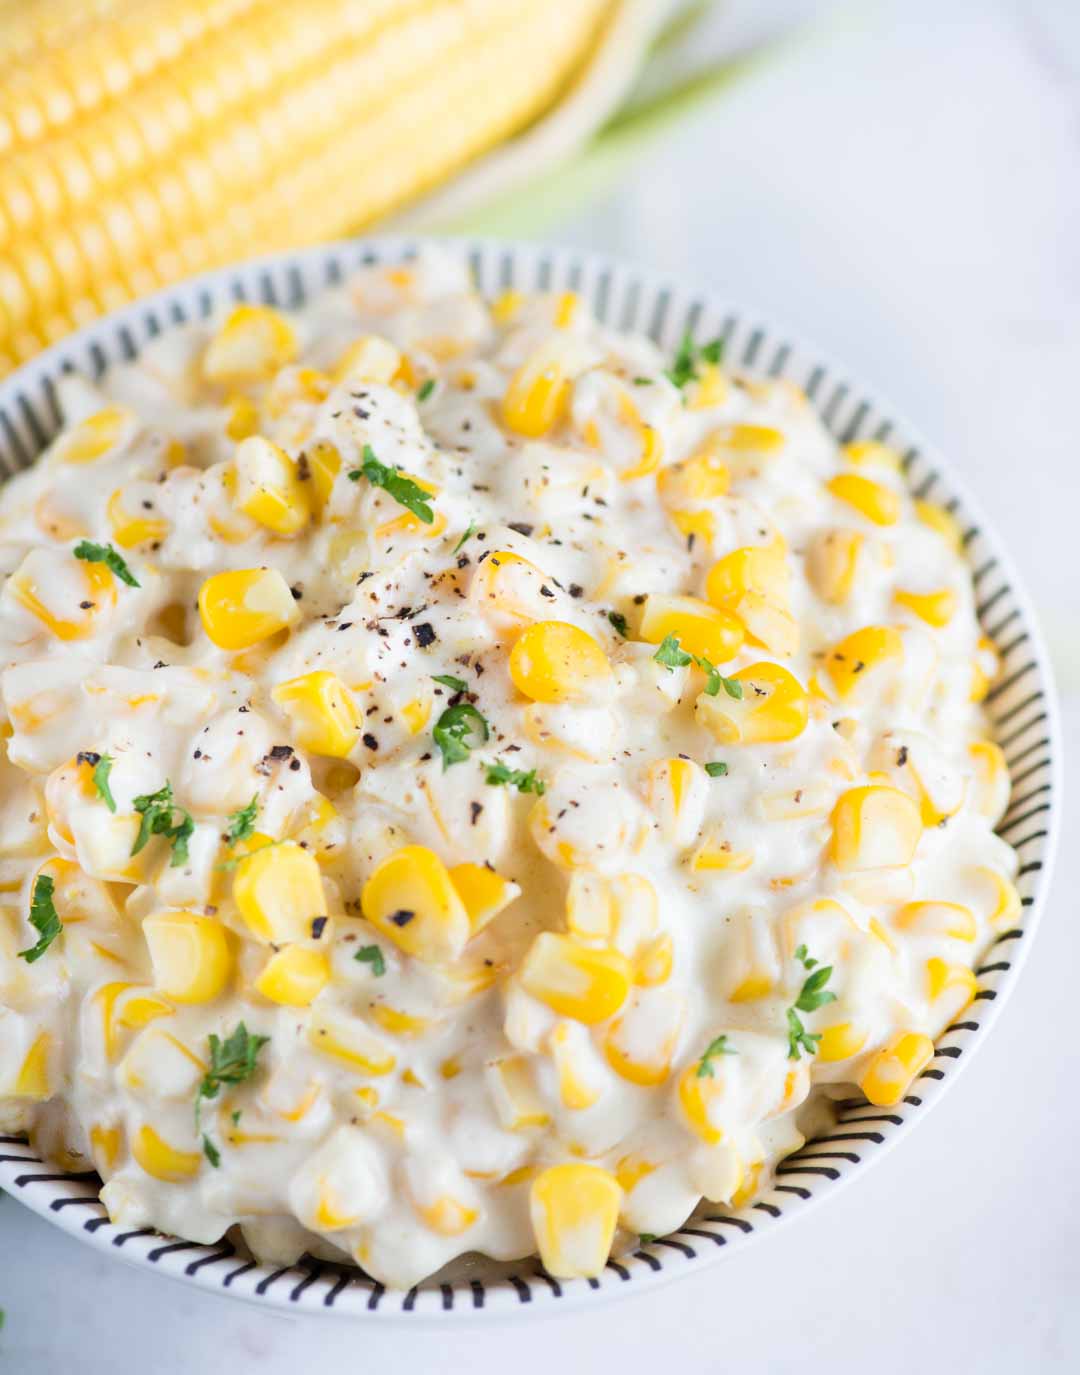 Learn how to make Creamed Corn from scratch. Fresh Corn, butter, flour roux and half& half is all you need to make this easy and creamy creamed corn recipe.